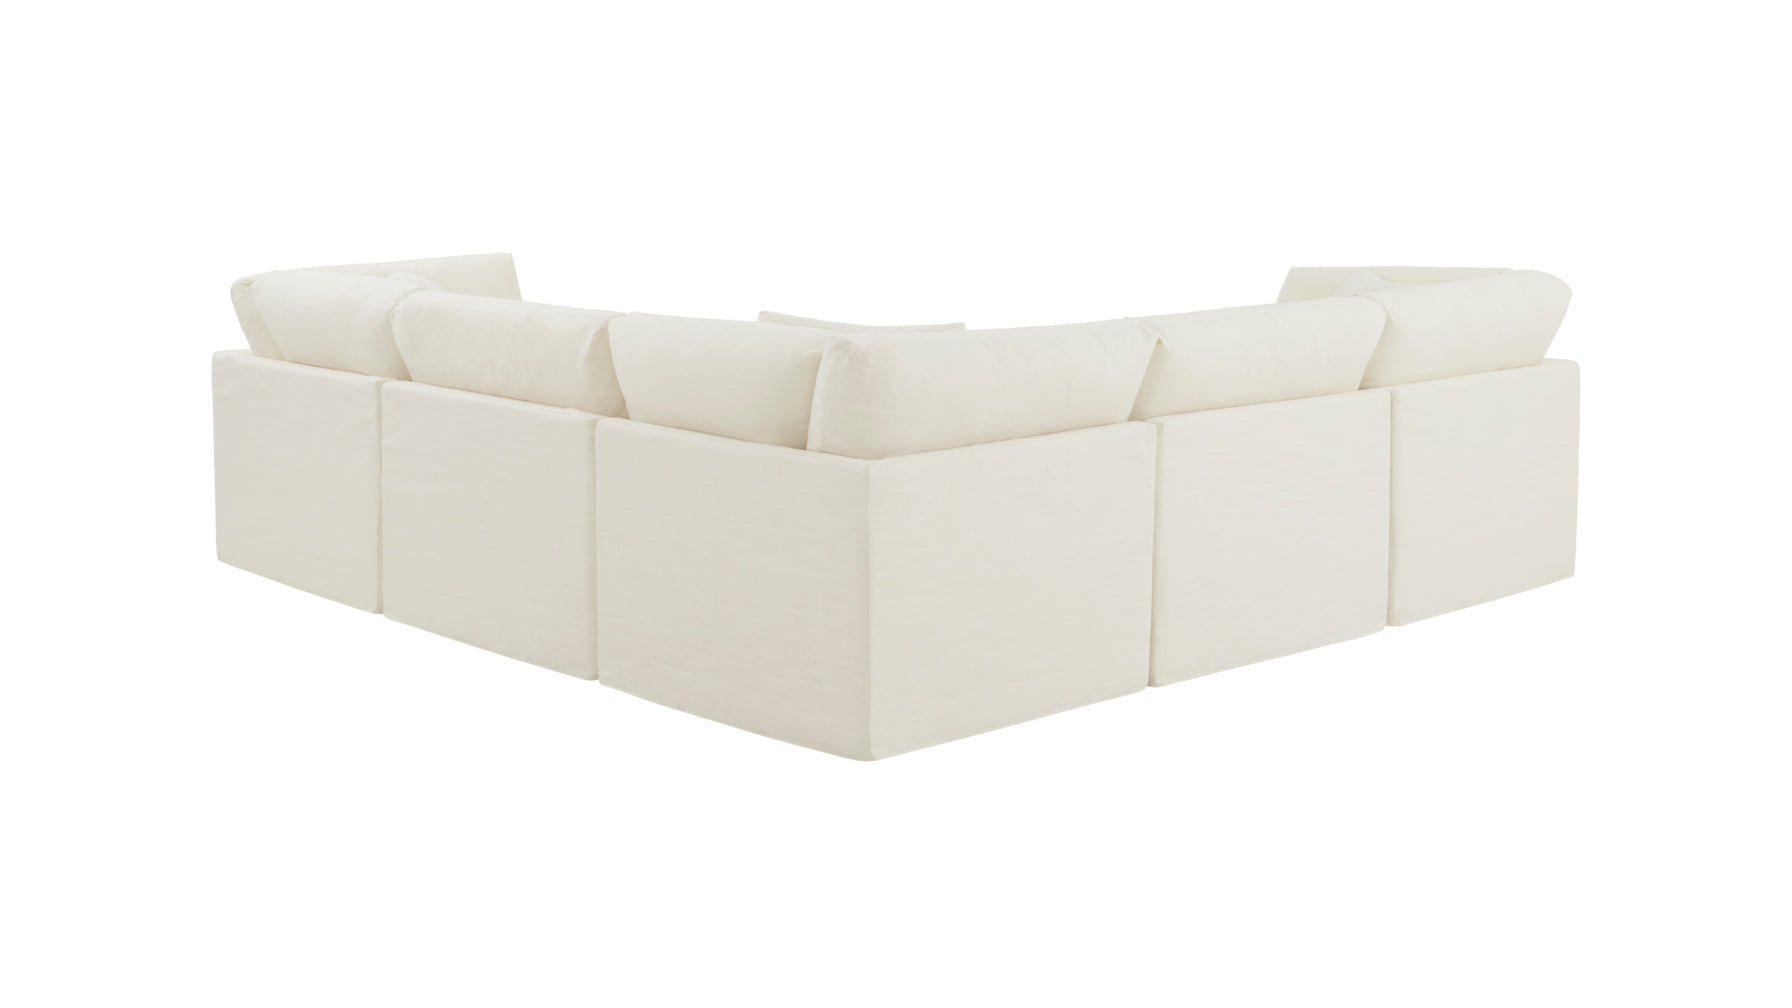 Get Together™ 5-Piece Modular Sectional Closed, Standard, Cream Linen - Image 9